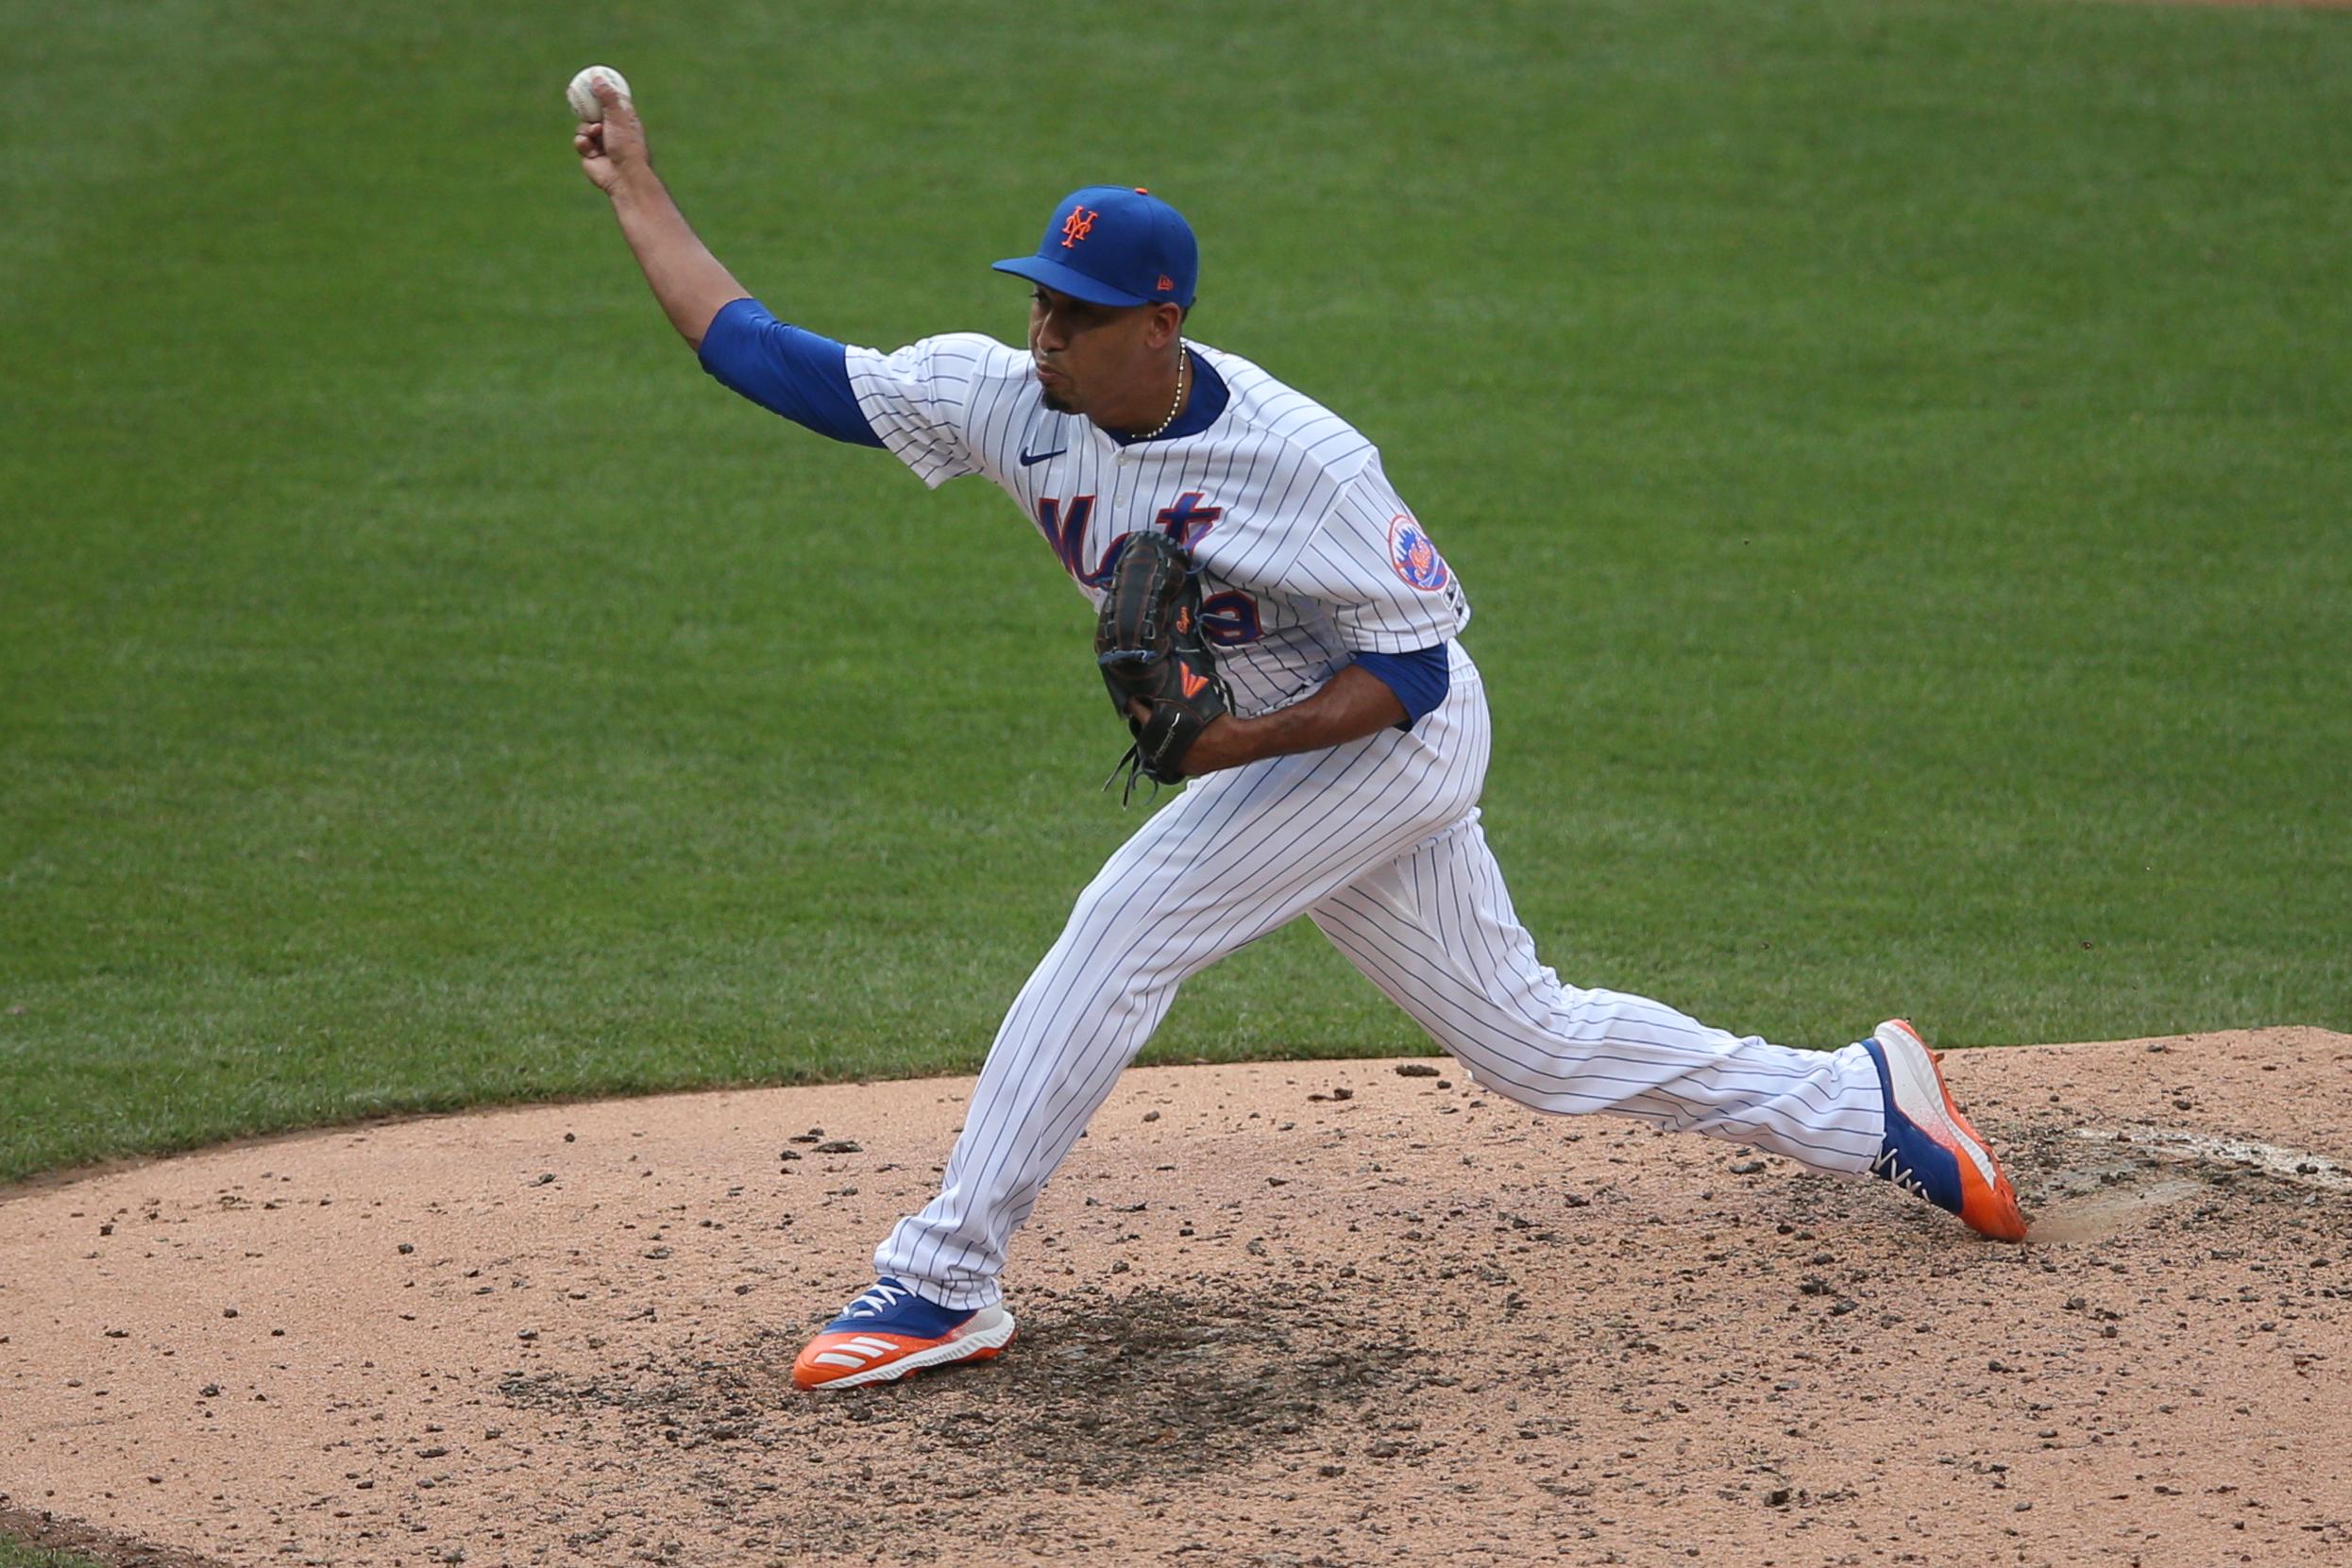 New York Mets relief pitcher Edwin Diaz (39) pitches against the Atlanta Braves during the ninth inning of an opening day game at Citi Field. / Brad Penner - USA Today Sports